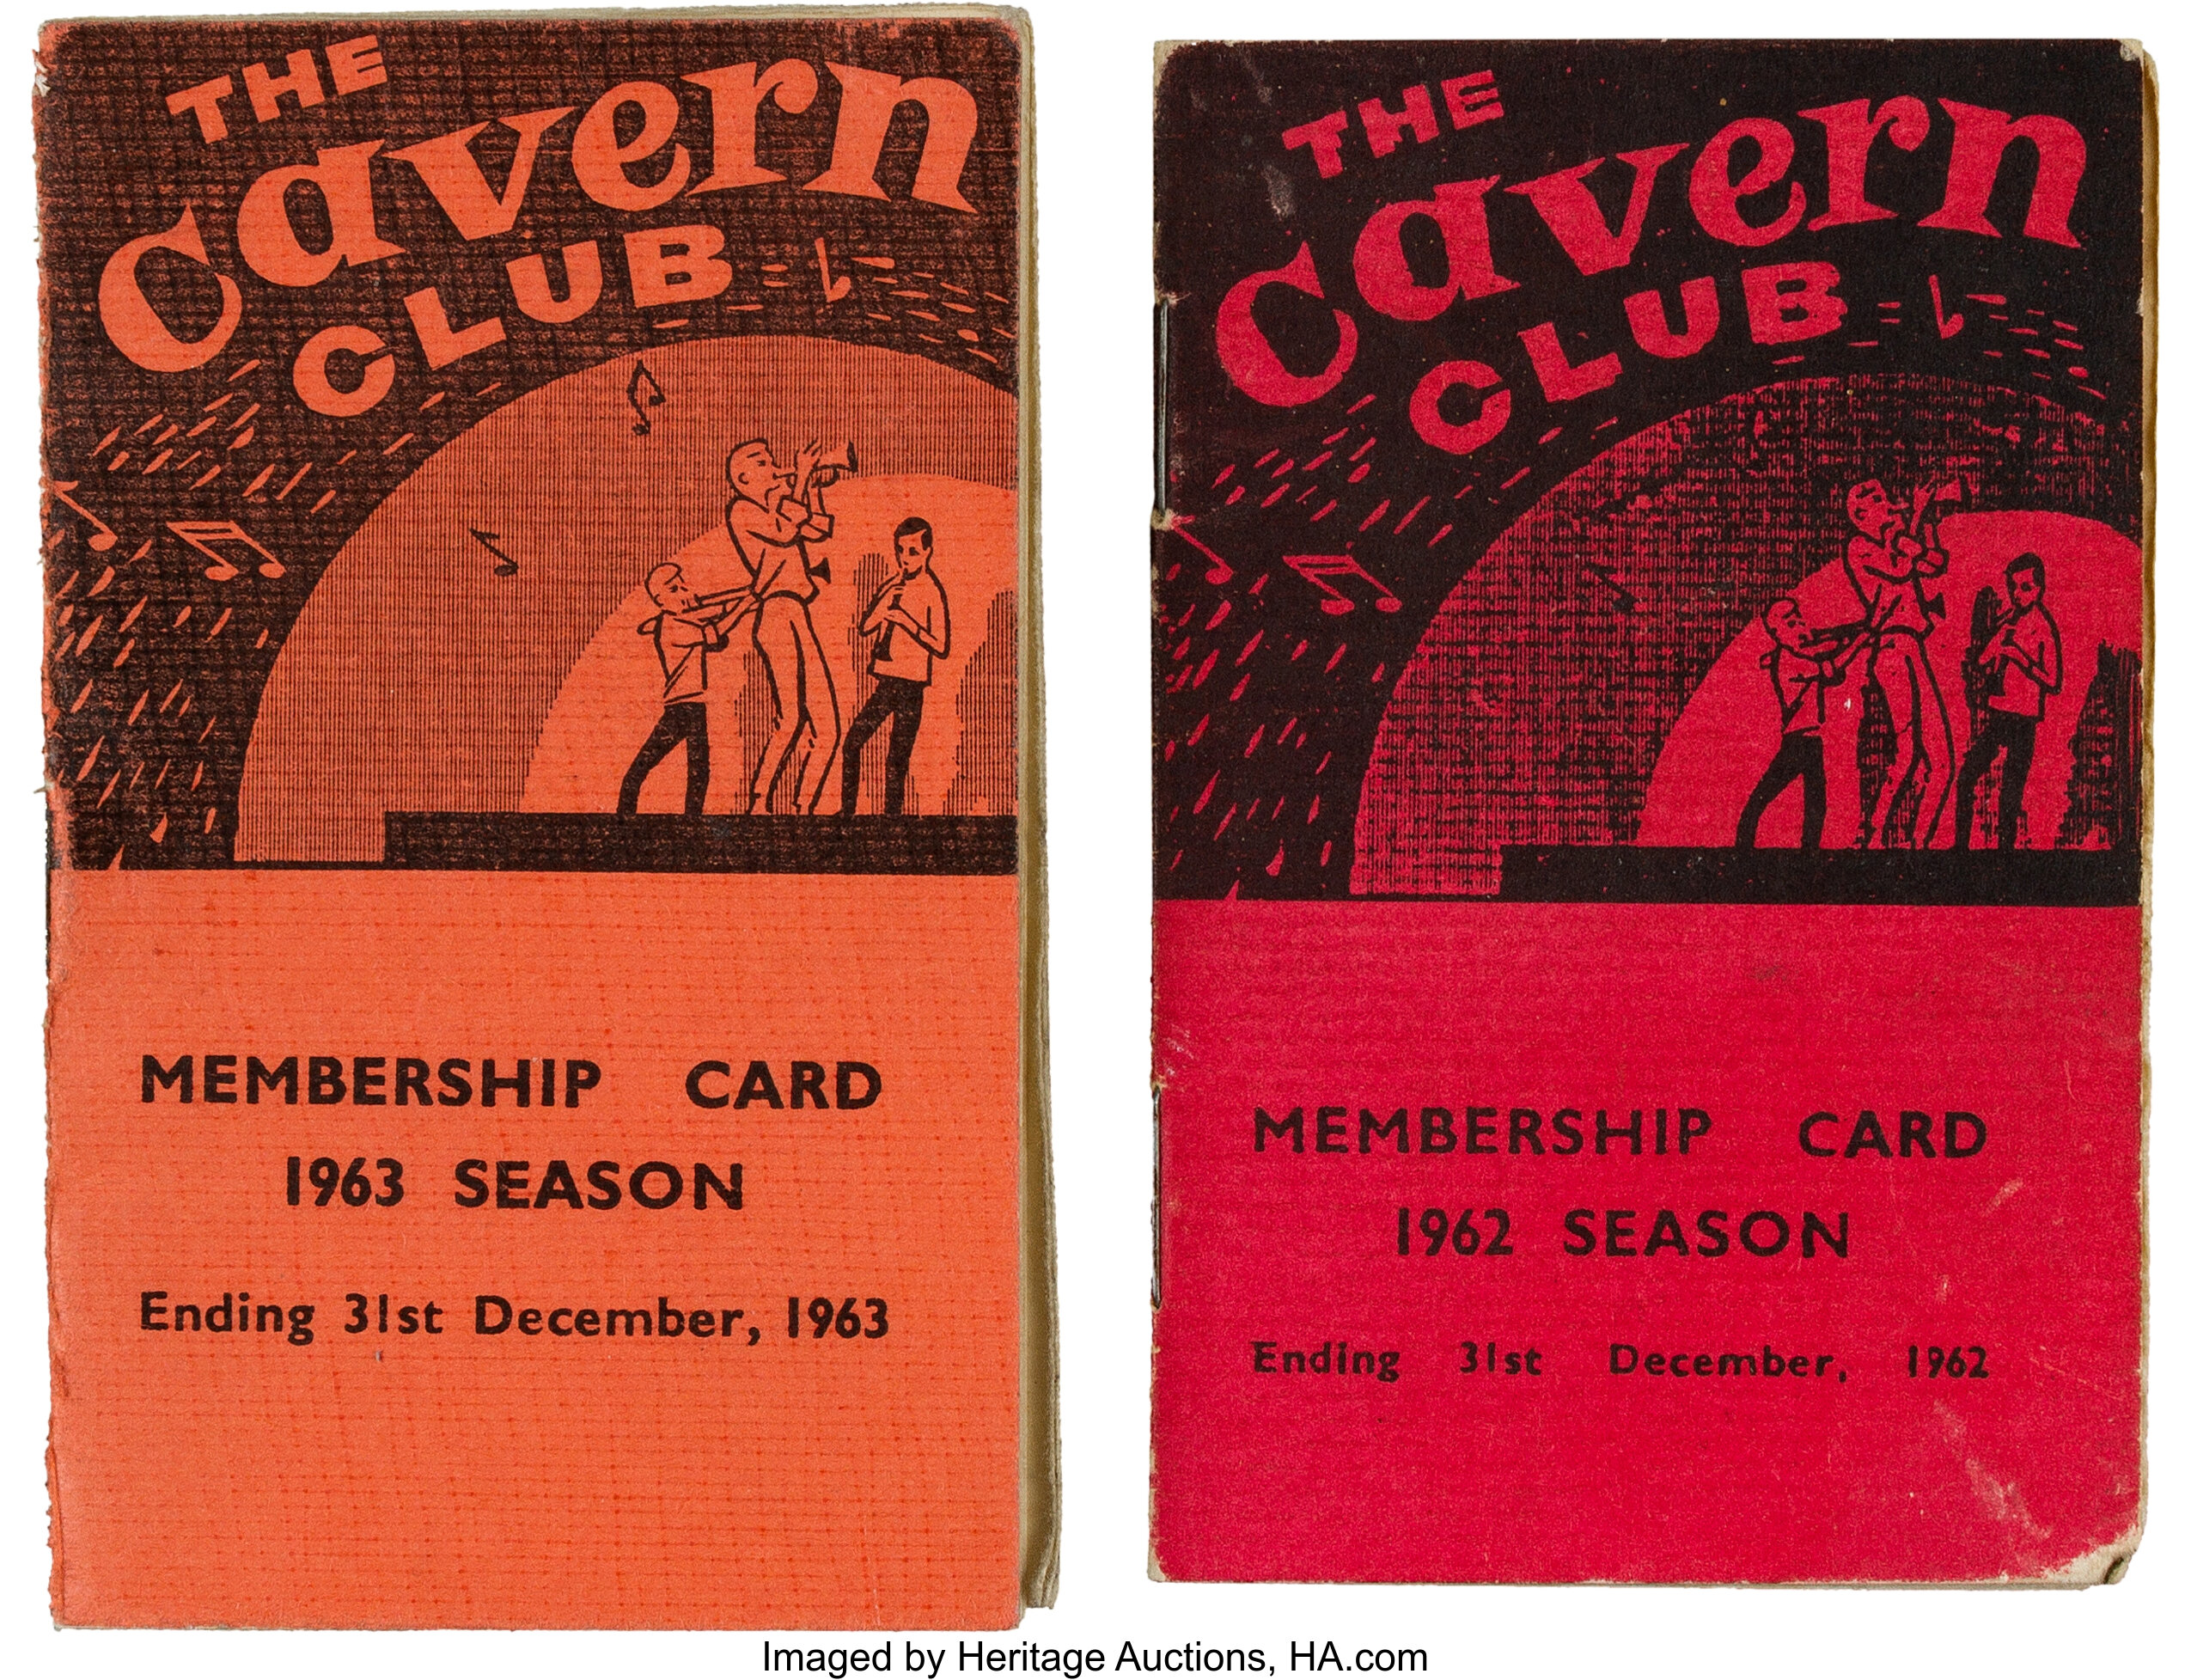 Cavern Club Membership Cards For 1962 And 1963 Total 2 Lot 314 Heritage Auctions